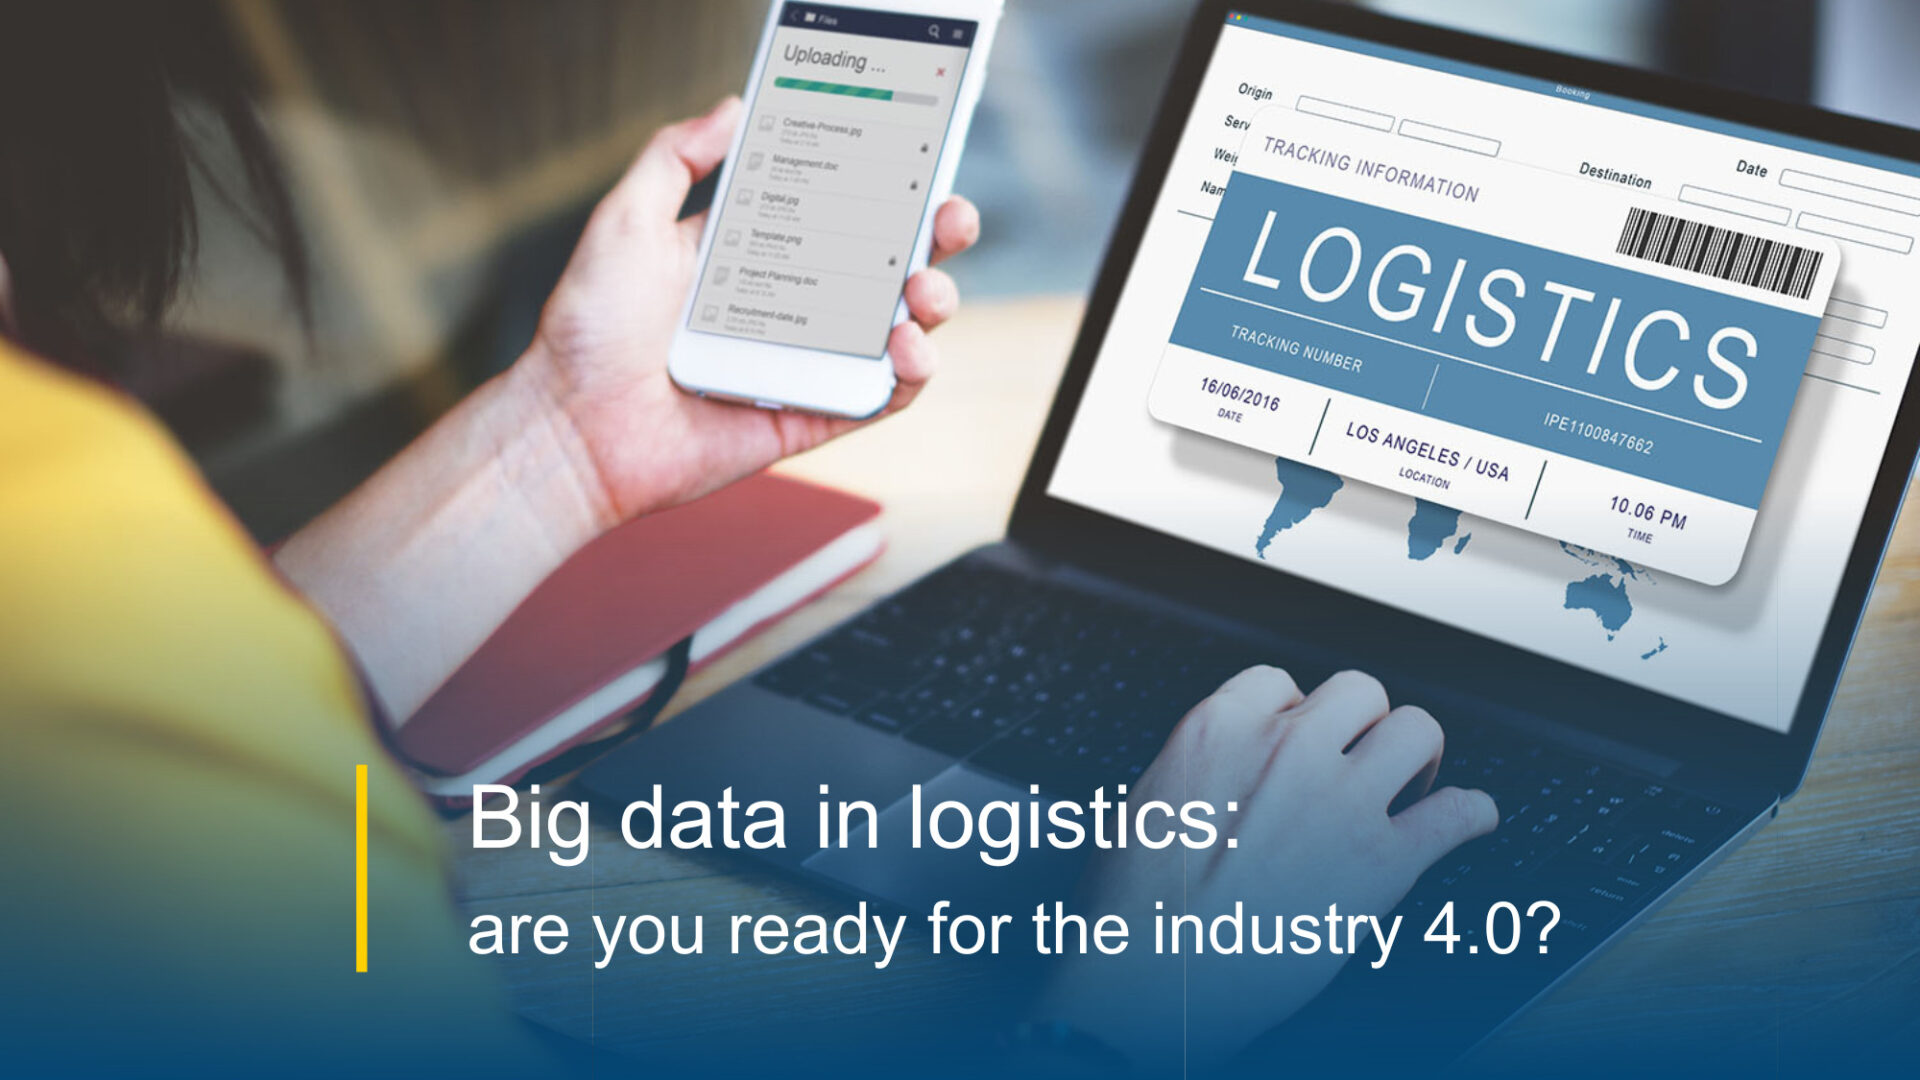 Big data in logistics: are you ready for the industry 4.0?